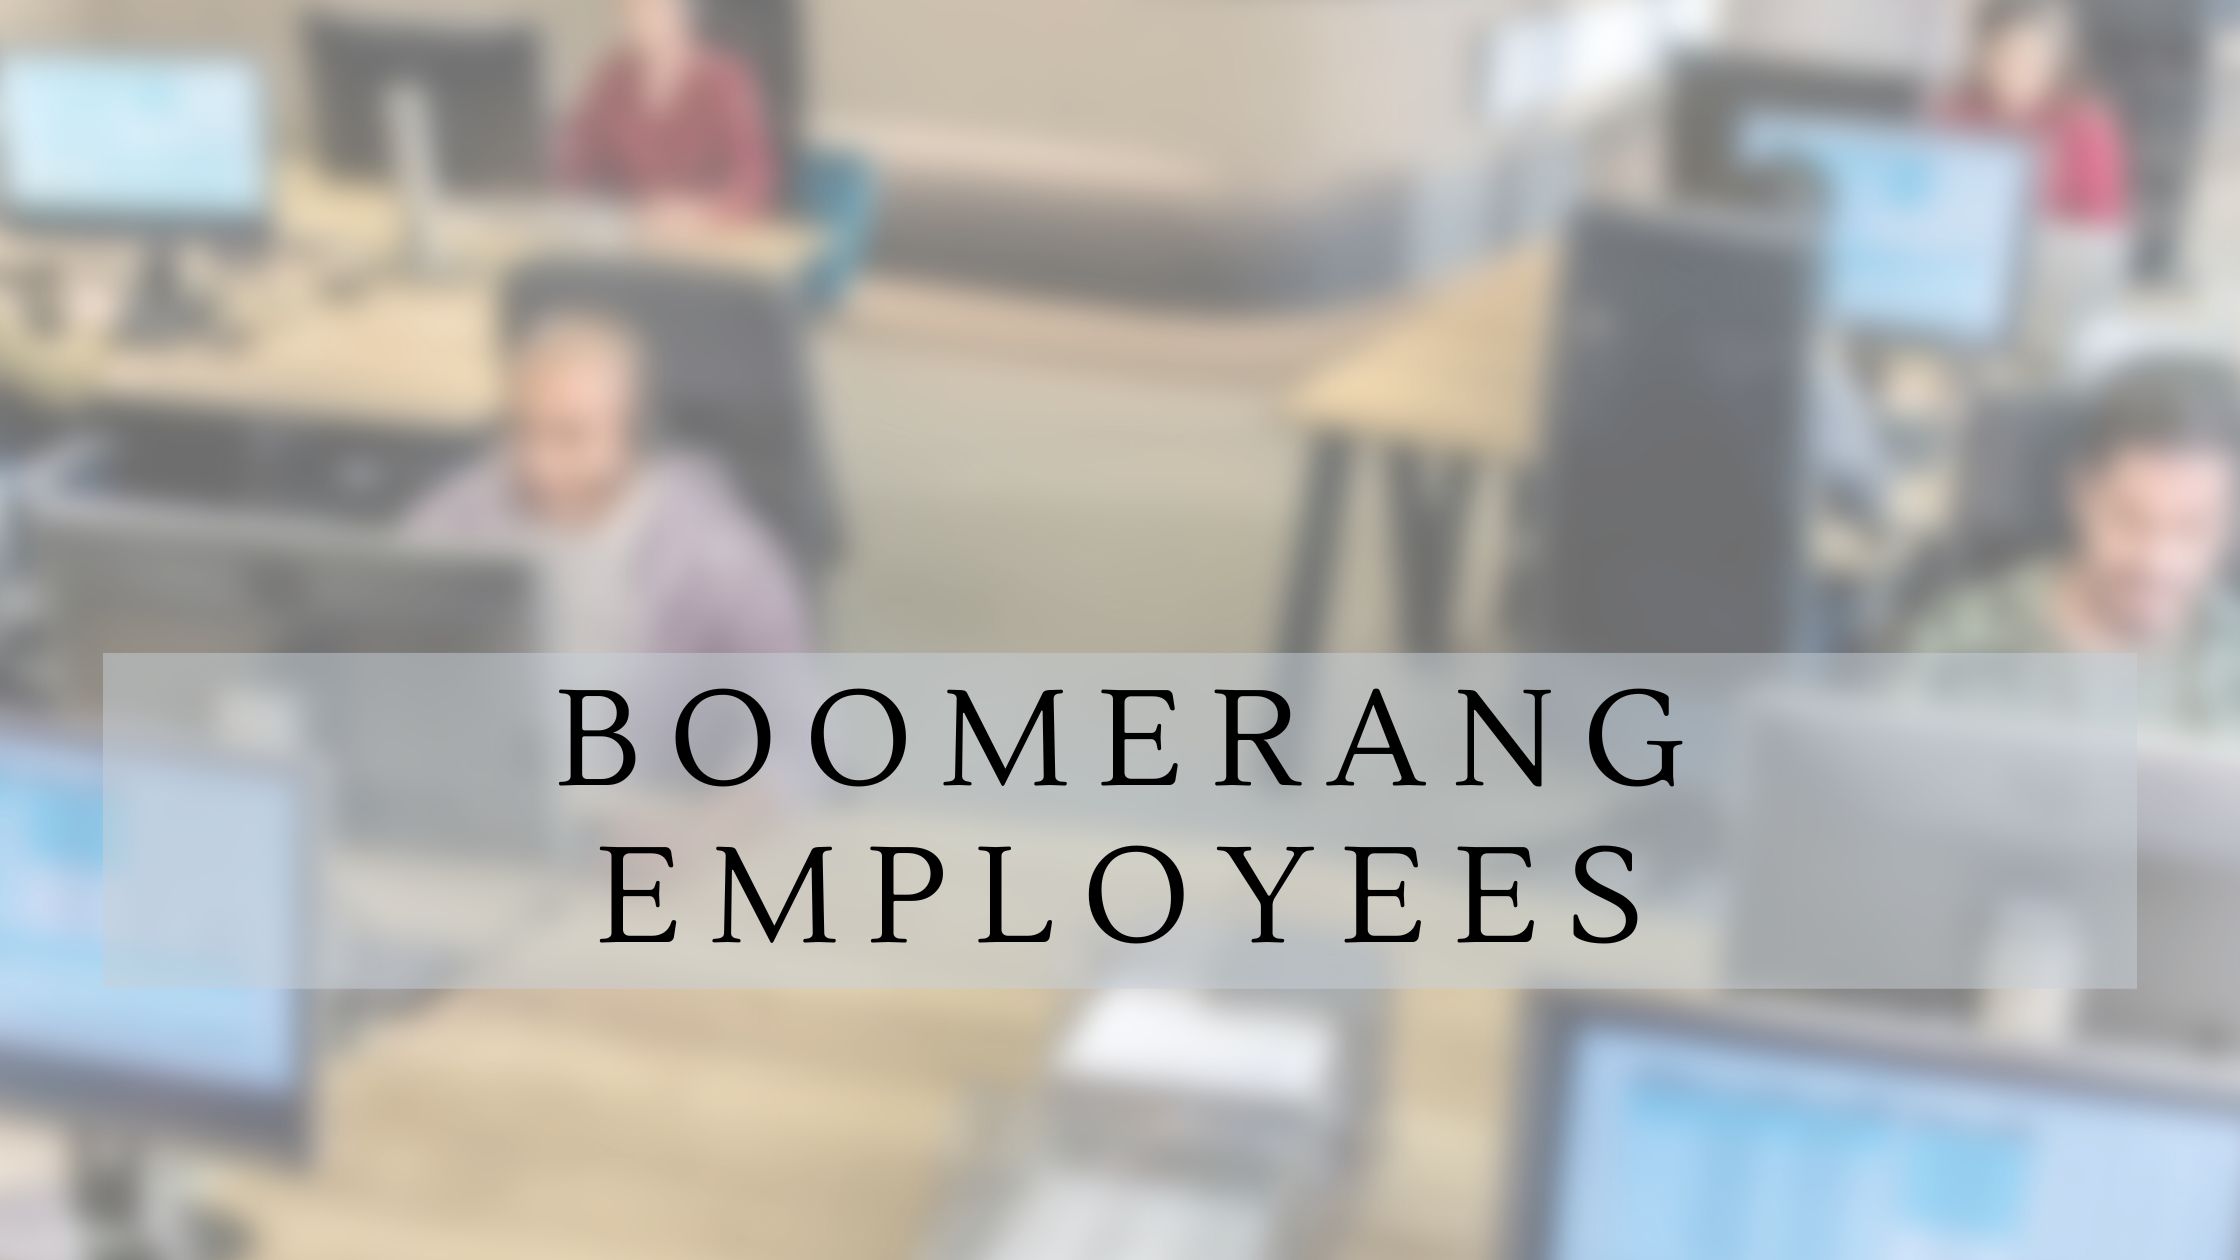 Boomerang Employees are important to your company